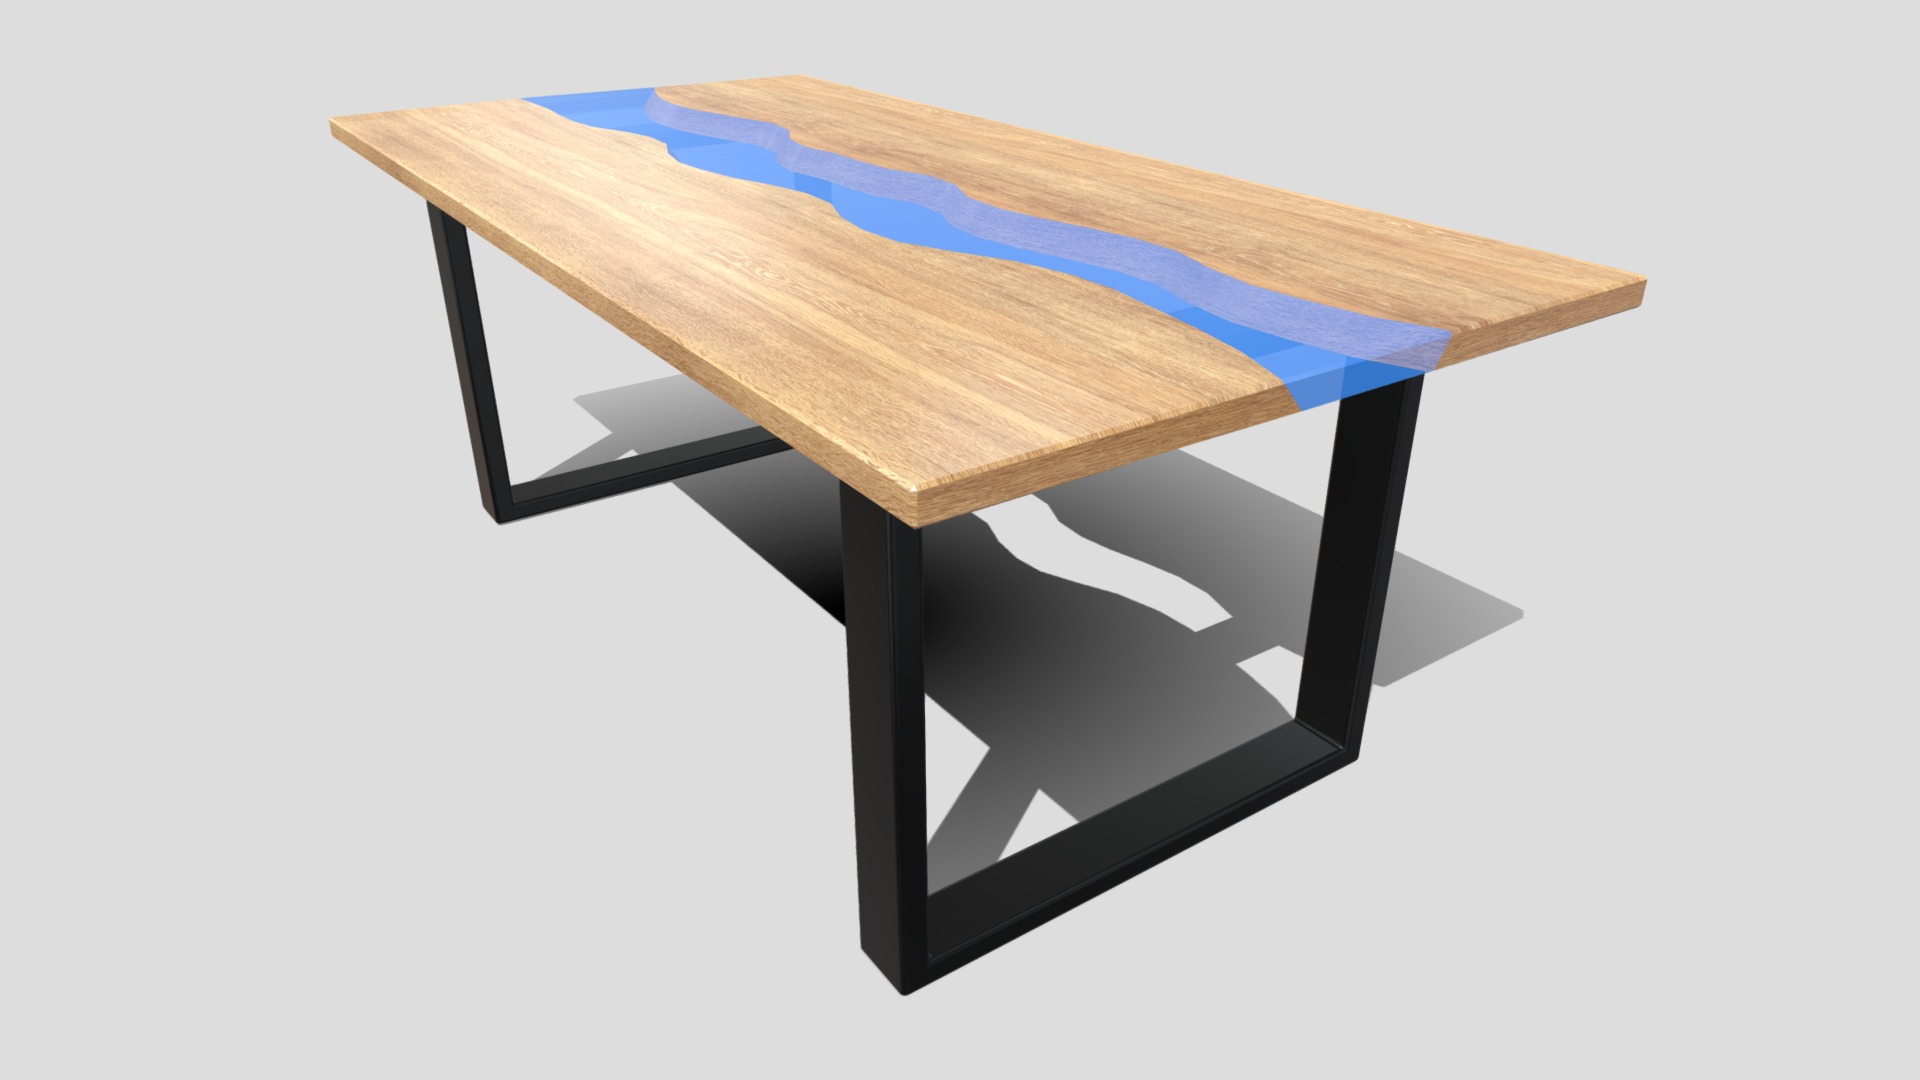 3D model Rivertable - This is a 3D model of the Rivertable. The 3D model is about a table with a blue cover.